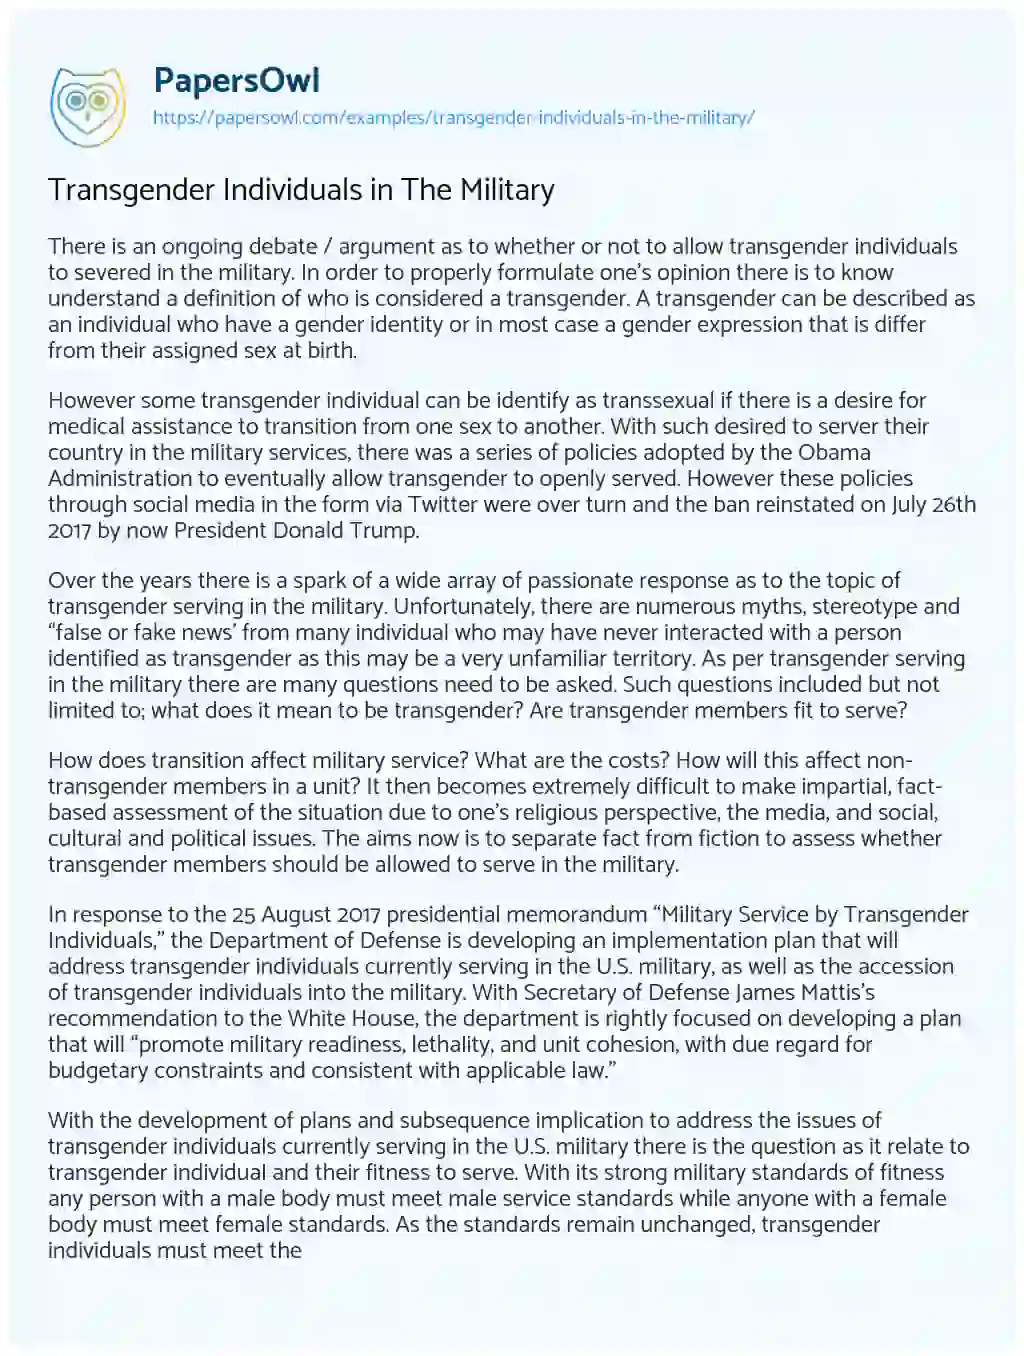 Essay on Transgender Individuals in the Military